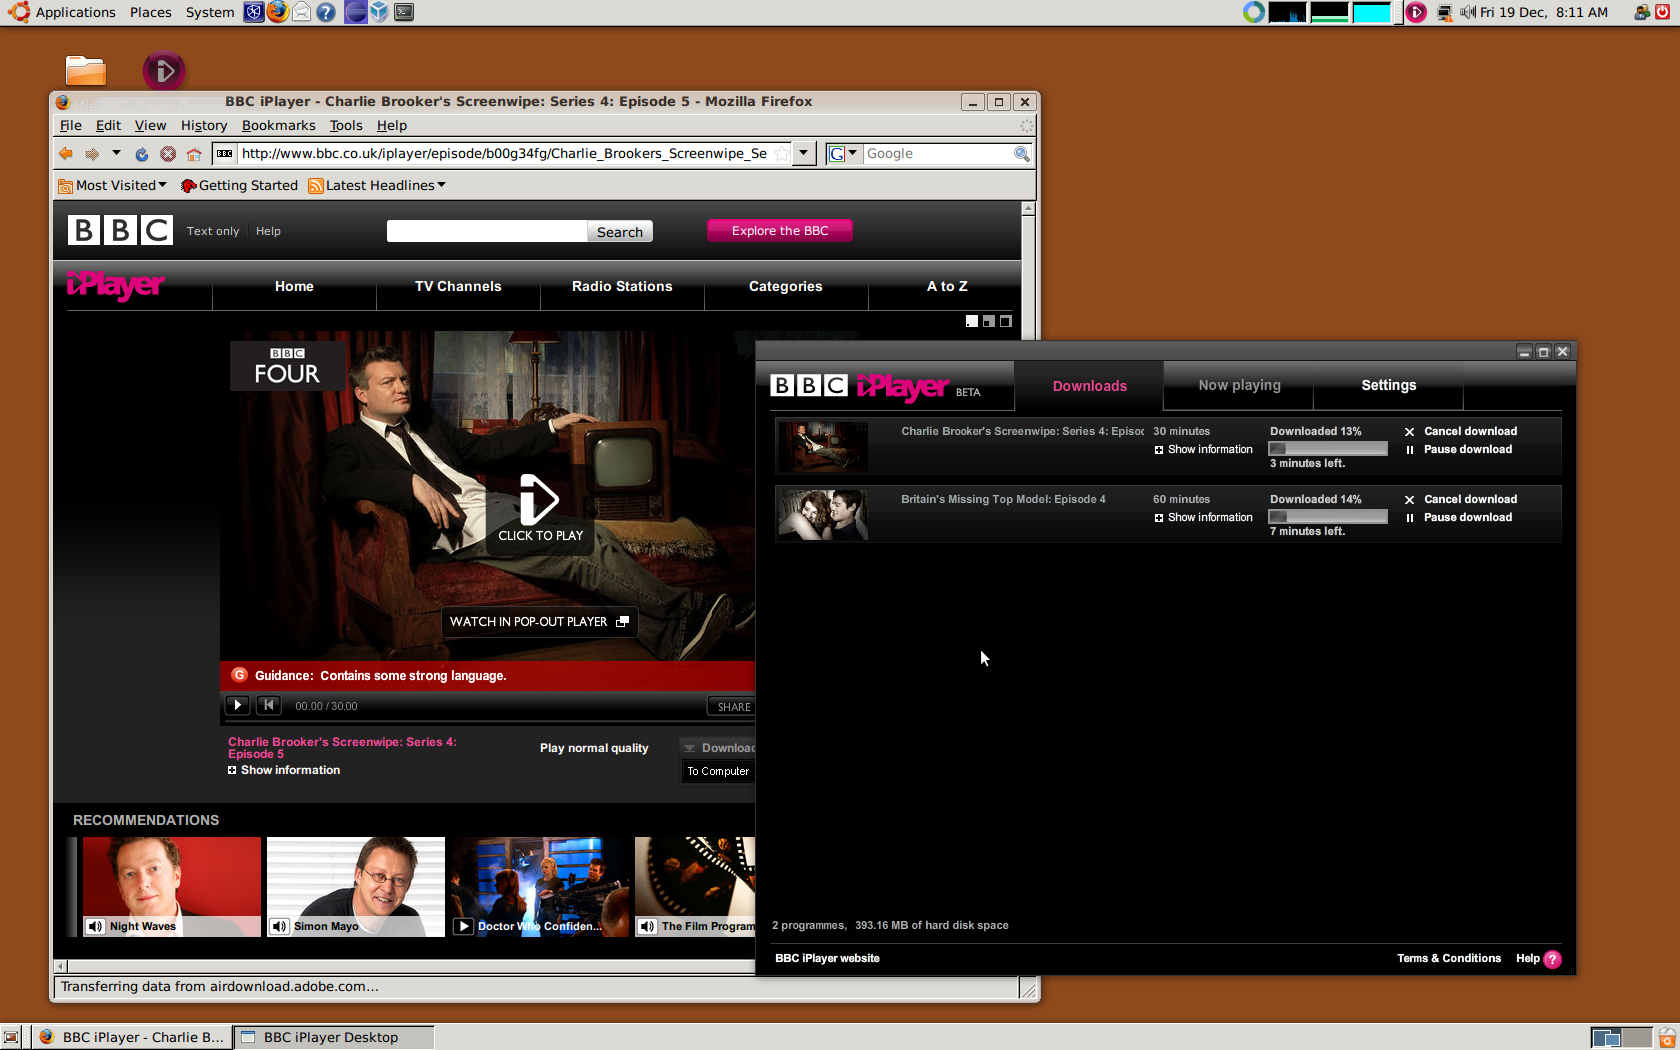 BBC iPlayer on Linux and downloading at last